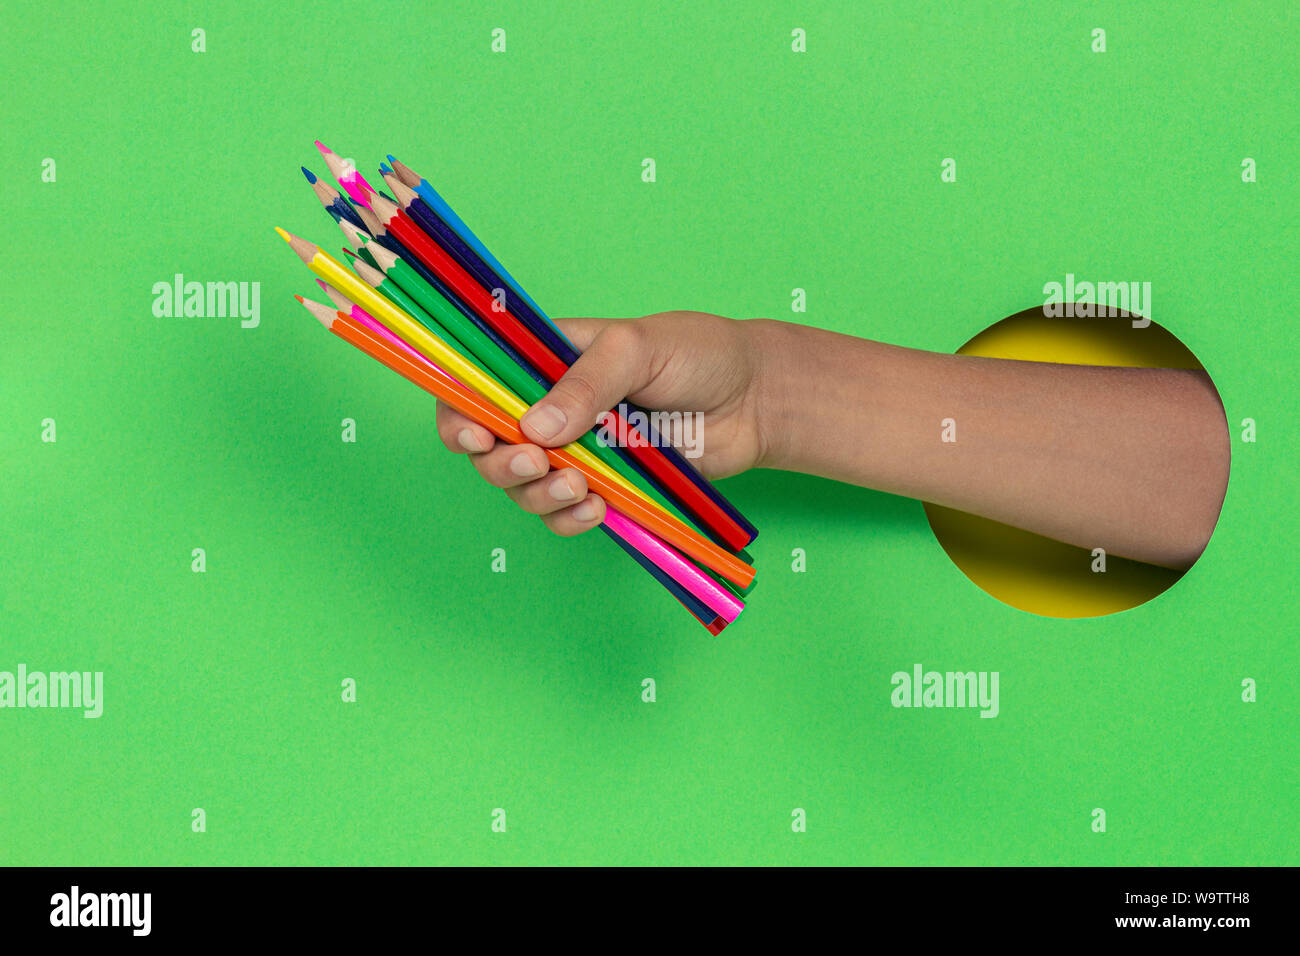 Kid holding colored pencils in hand through hole on light green background Stock Photo